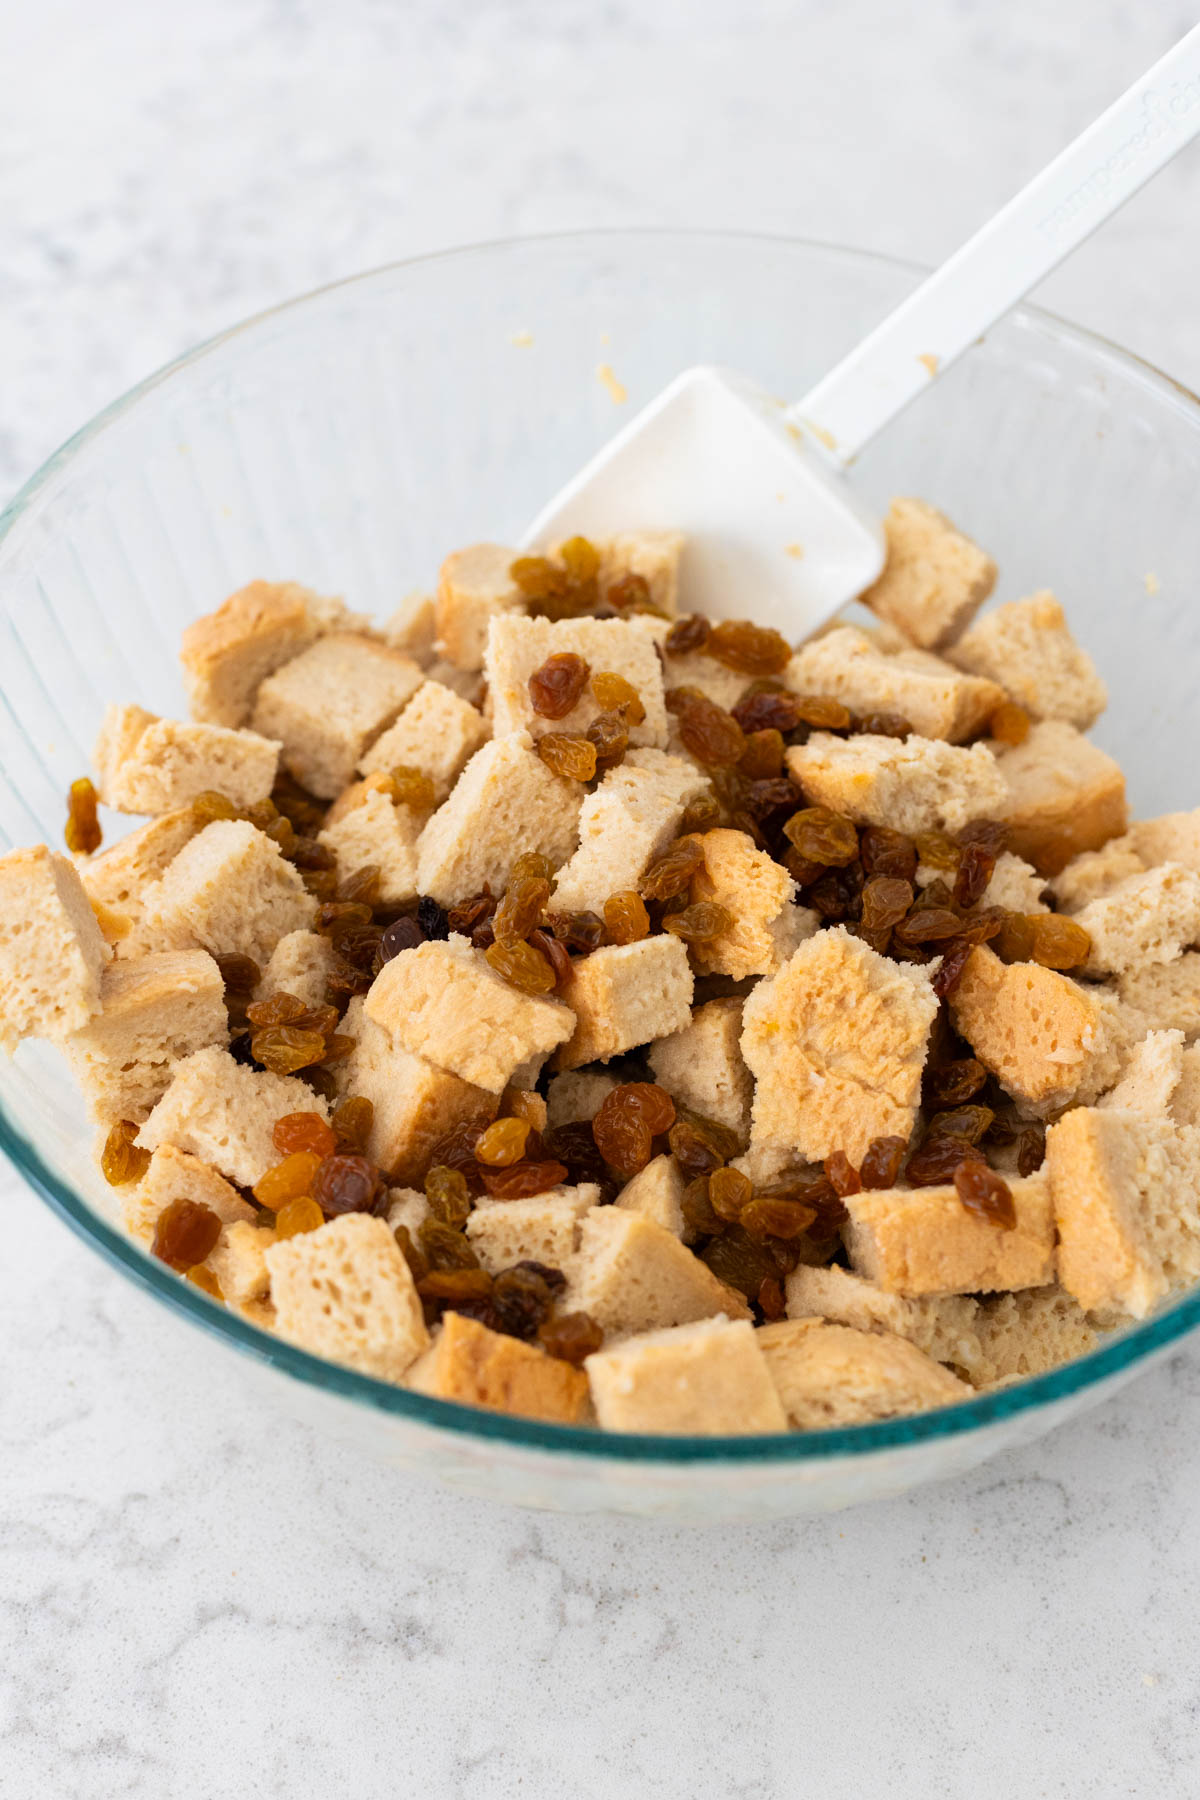 The cubes of French bread and golden raisins are soaking in the egg custard mixture in a large mixing bowl.